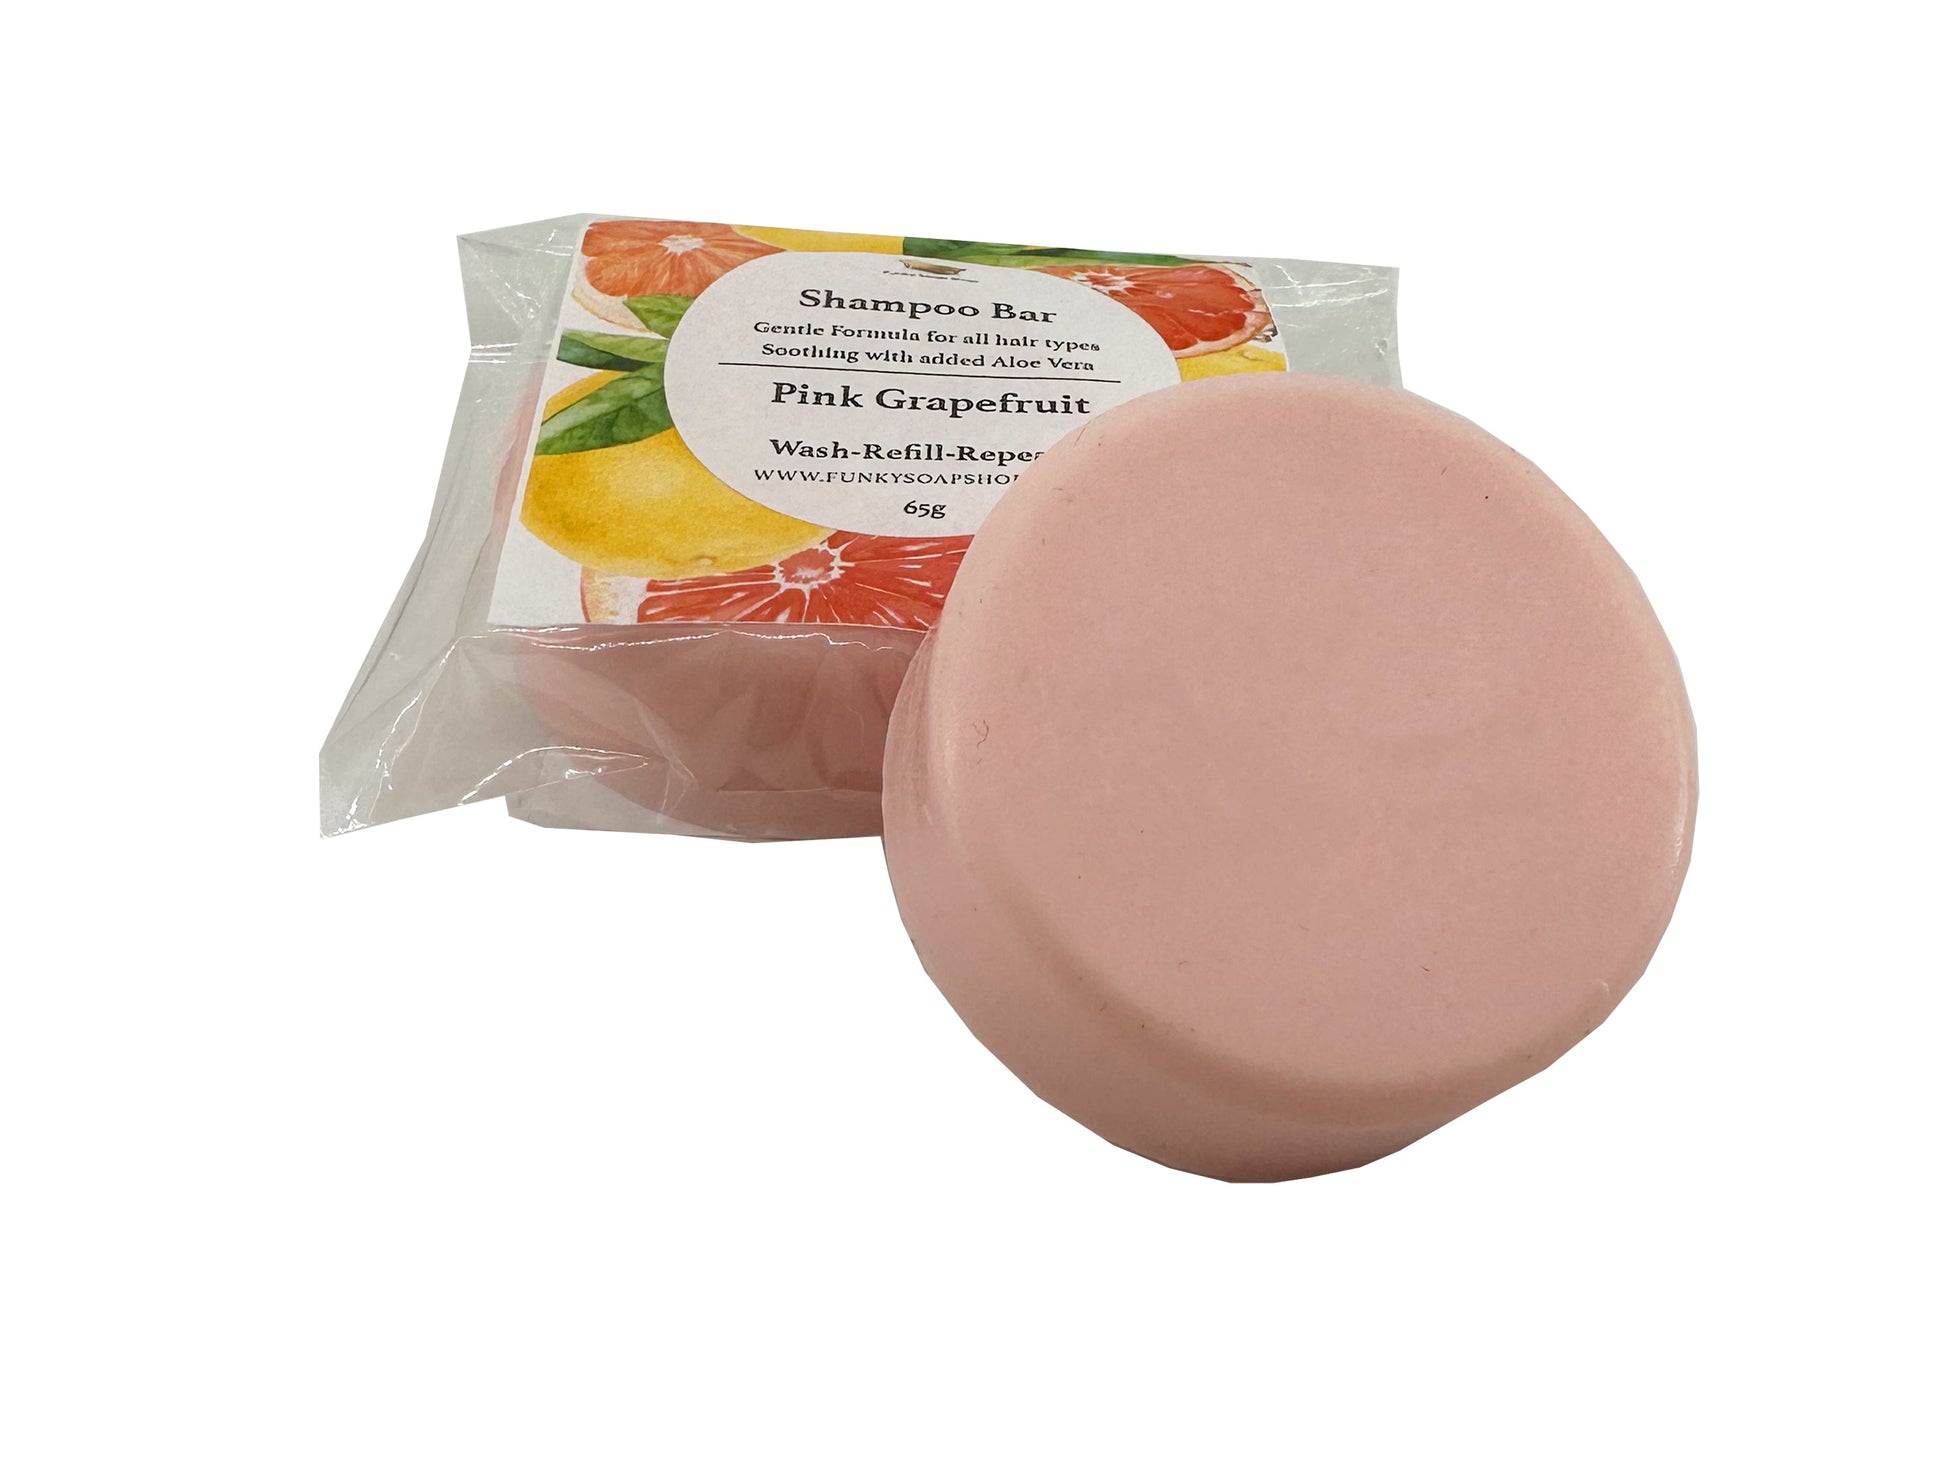 Wash Refill Repeat - Choice of Shampoo Bars in 6 gorgeous scents with optional Travel Tin, 65g - Funky Soap Shop